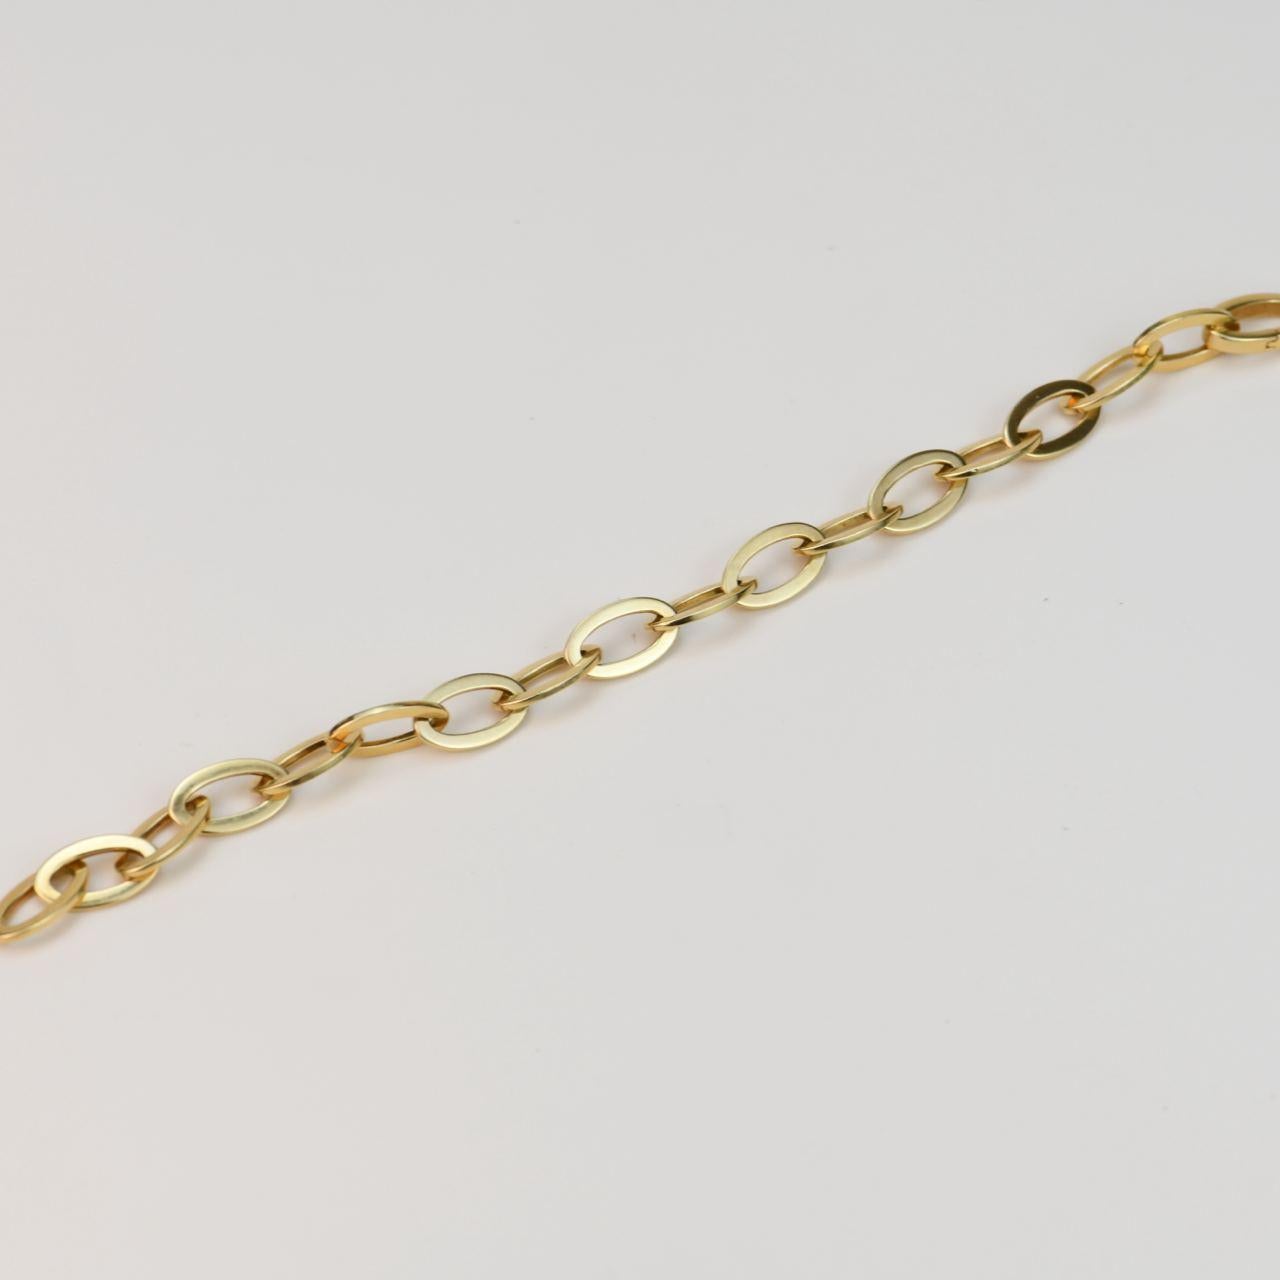 Van Cleef & Arpels Byzantine 18k Yellow Gold Bracelet In Excellent Condition For Sale In Banbury, GB